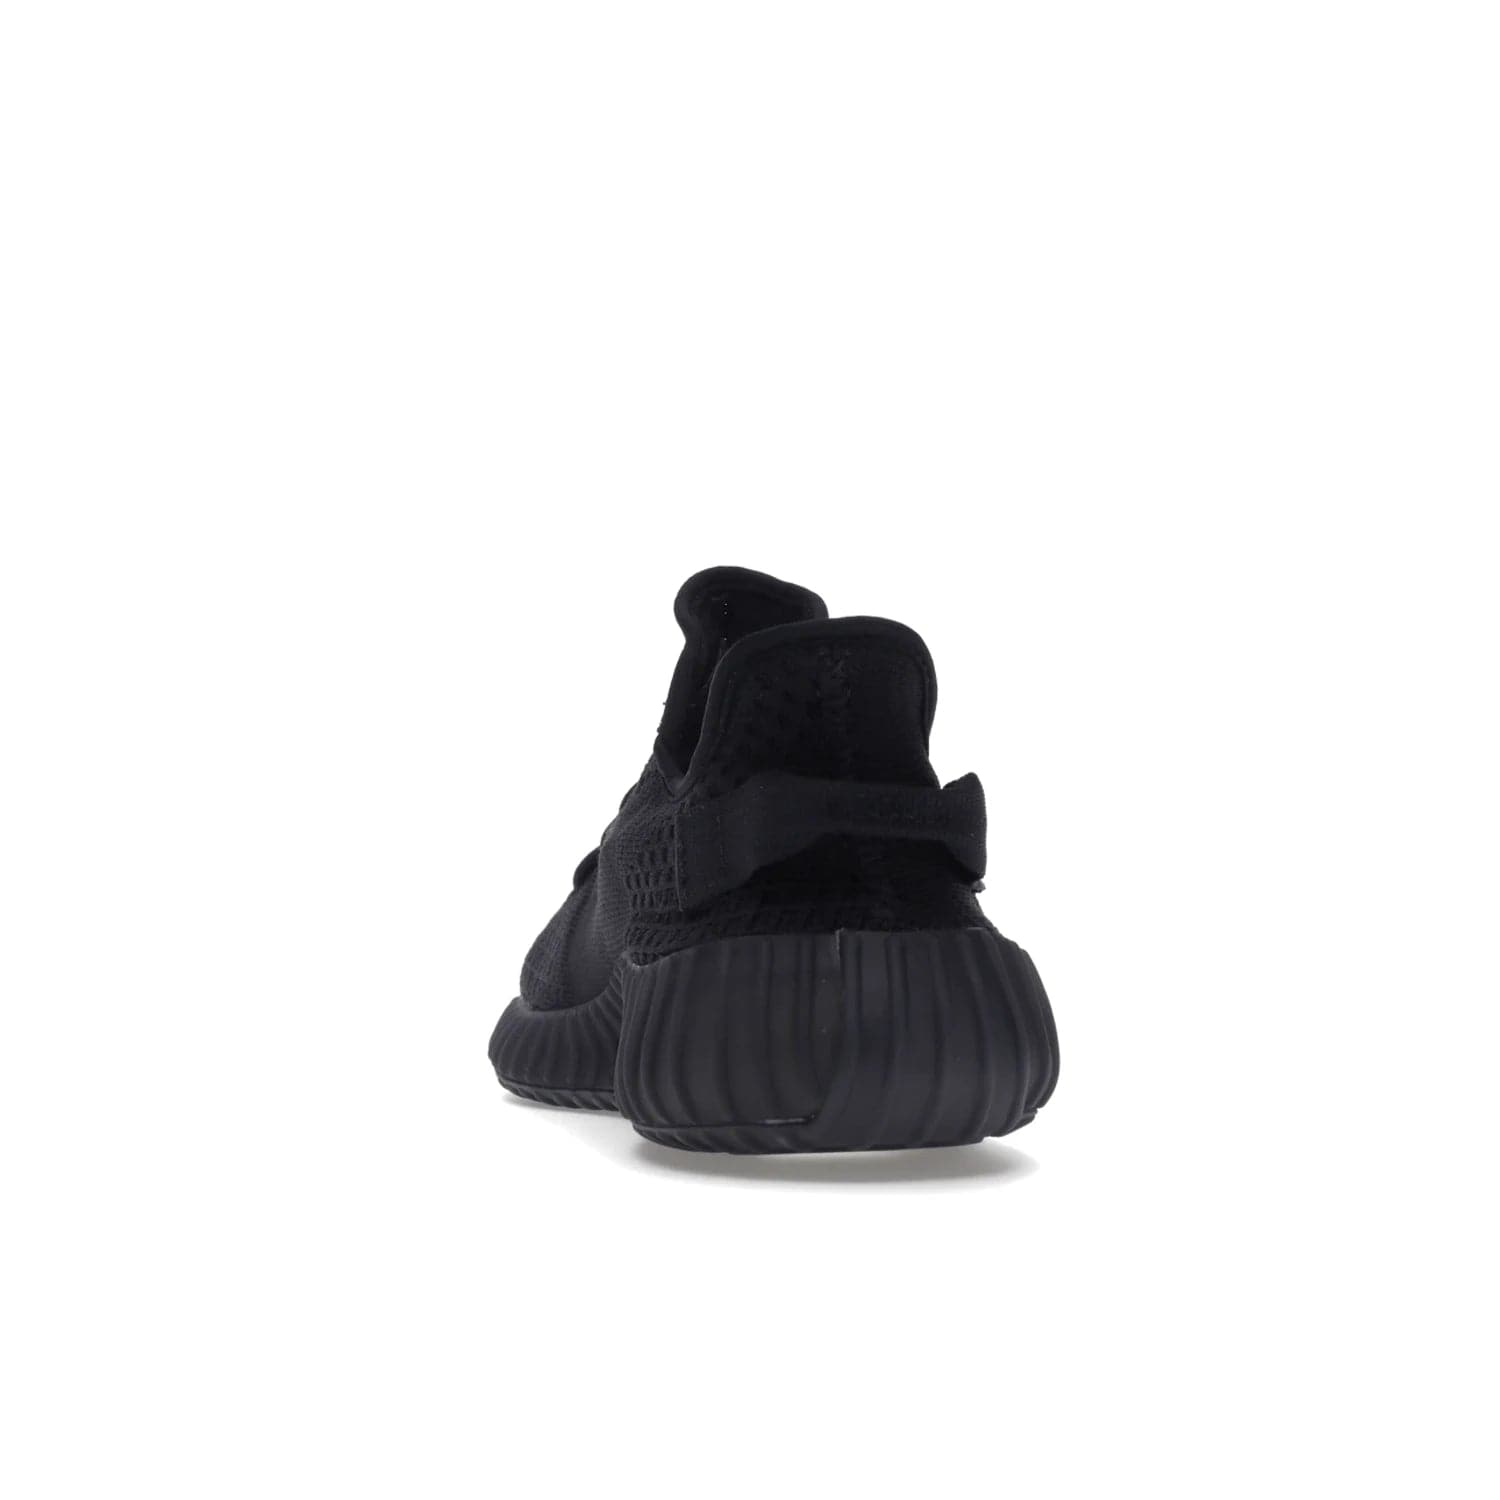 adidas Yeezy Boost 350 V2 Onyx - Image 27 - Only at www.BallersClubKickz.com - Adidas Yeezy Boost 350 V2 Onyx Triple Black shoes for comfort and style. Arriving Spring 2022.